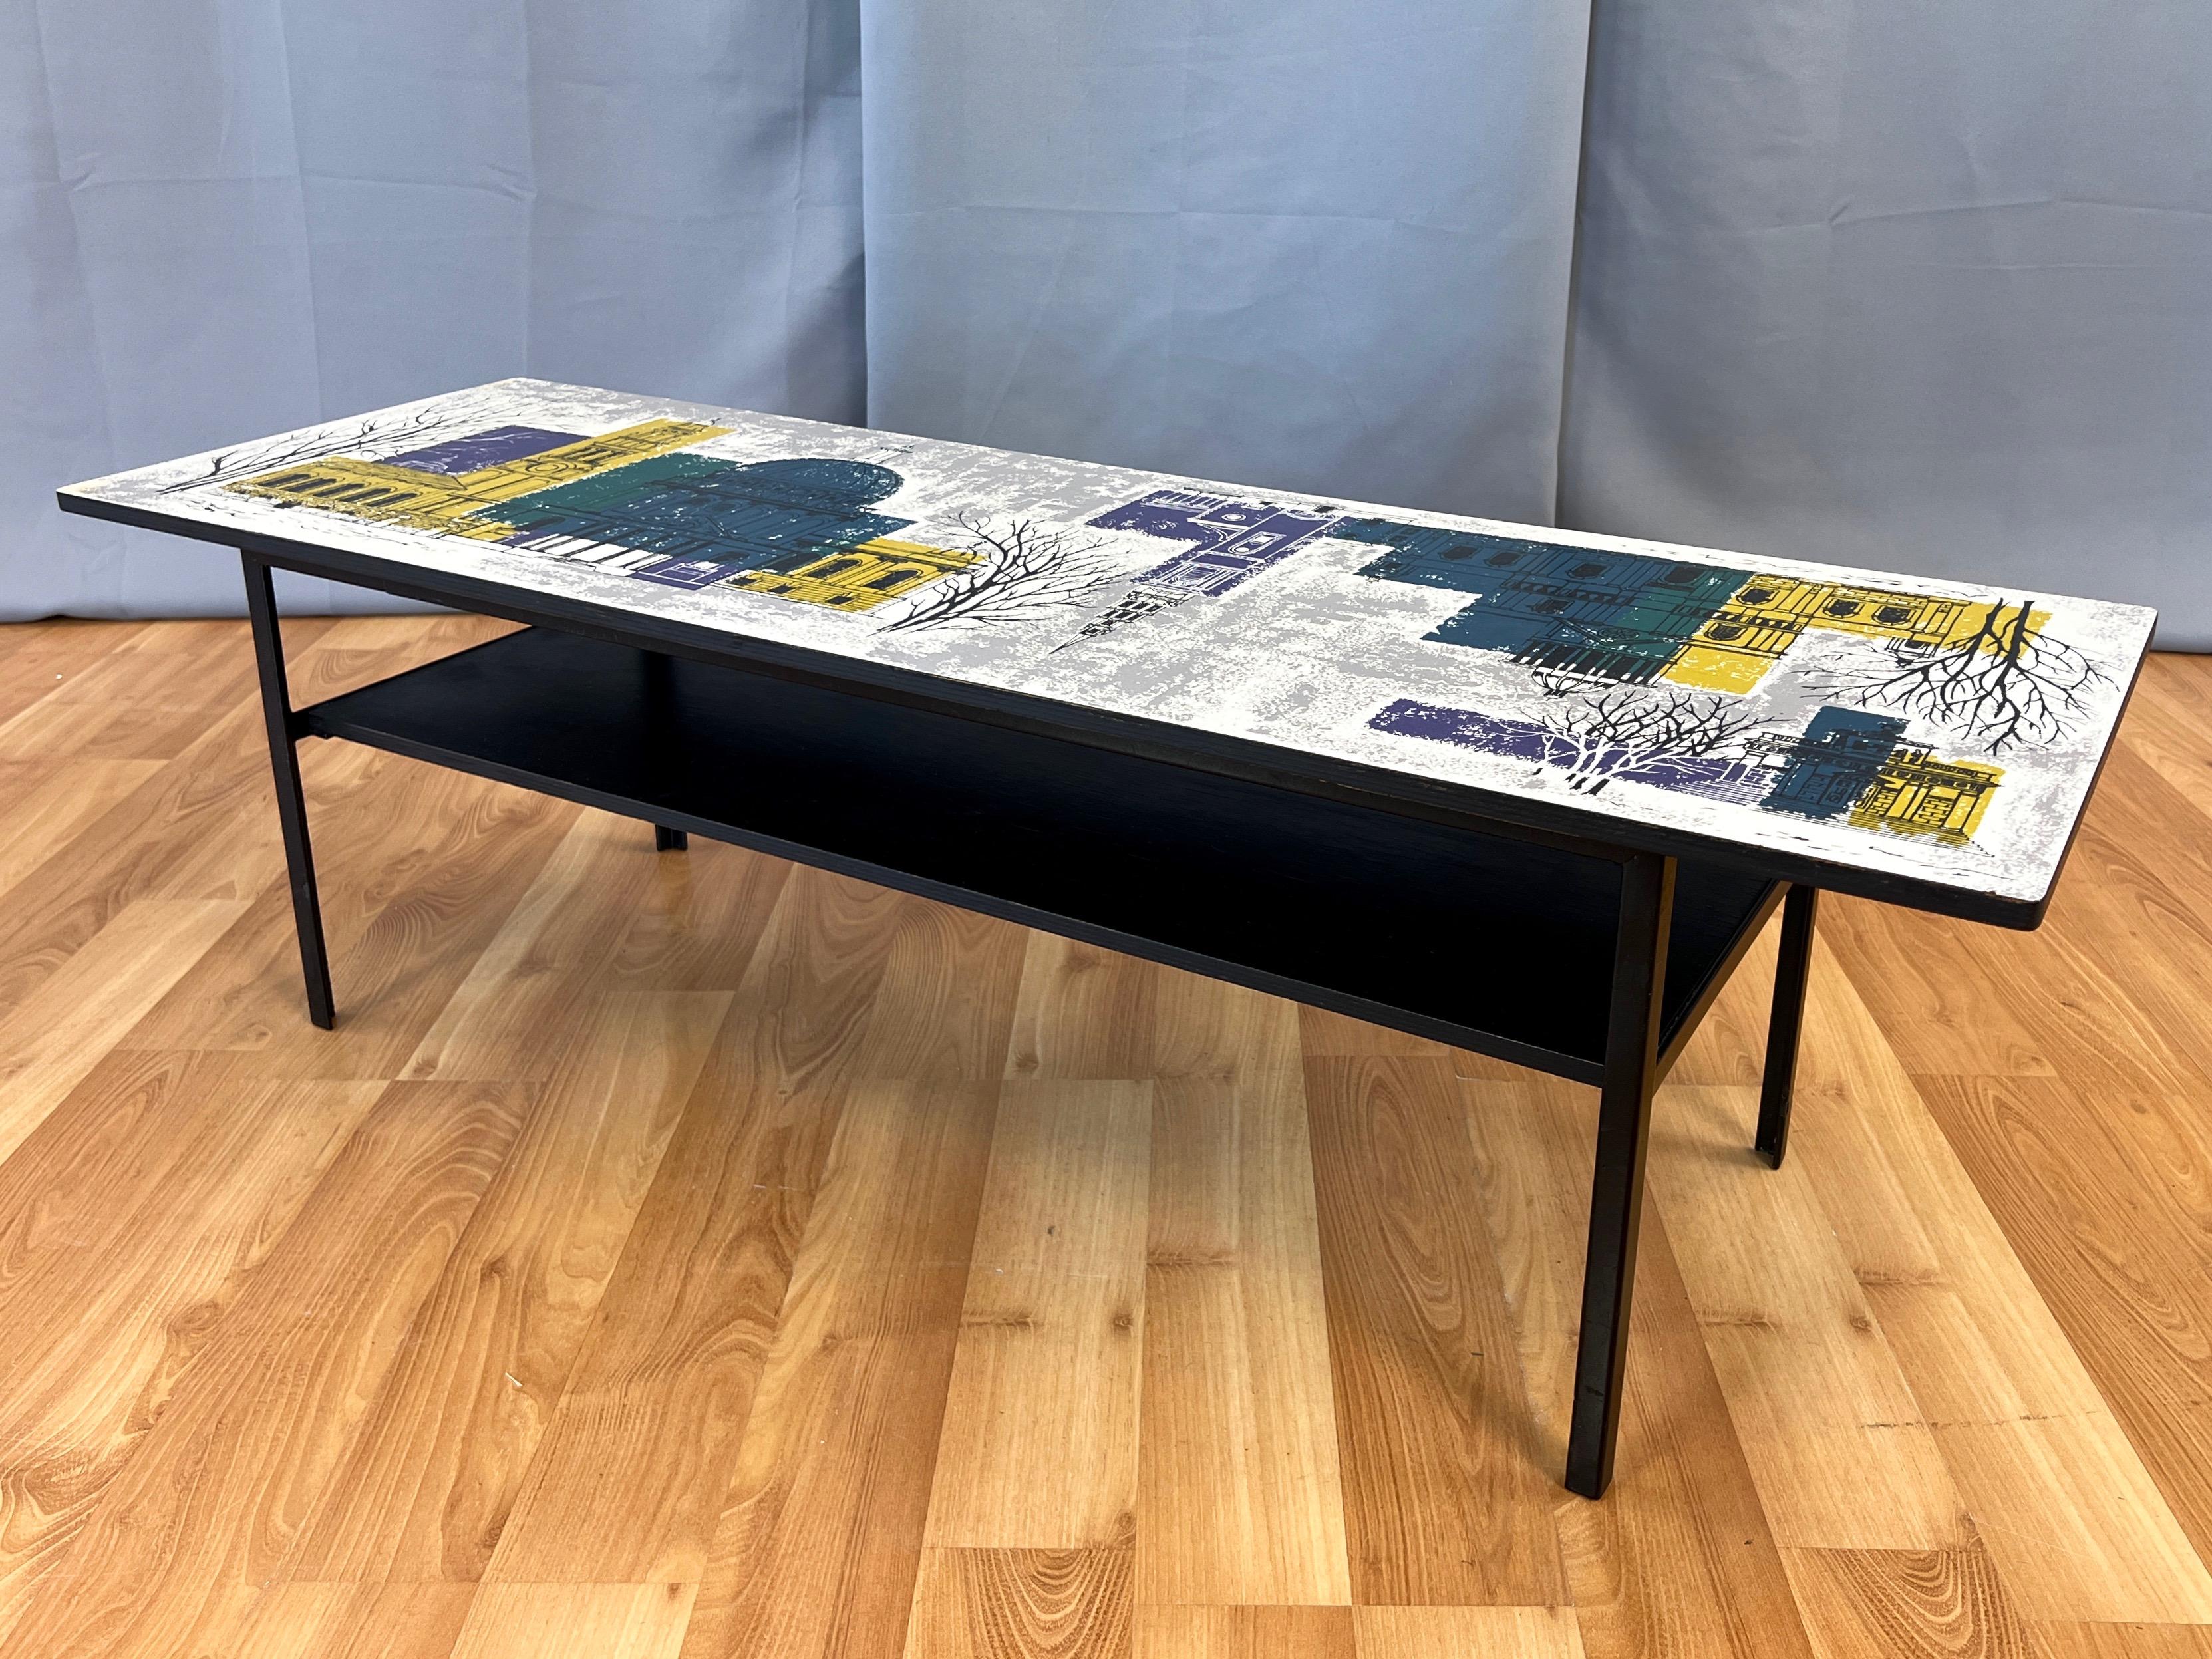 Mid-Century Modern John Piper London Skyline Coffee Table by Myer for Conran and Heal’s, c. 1960 For Sale